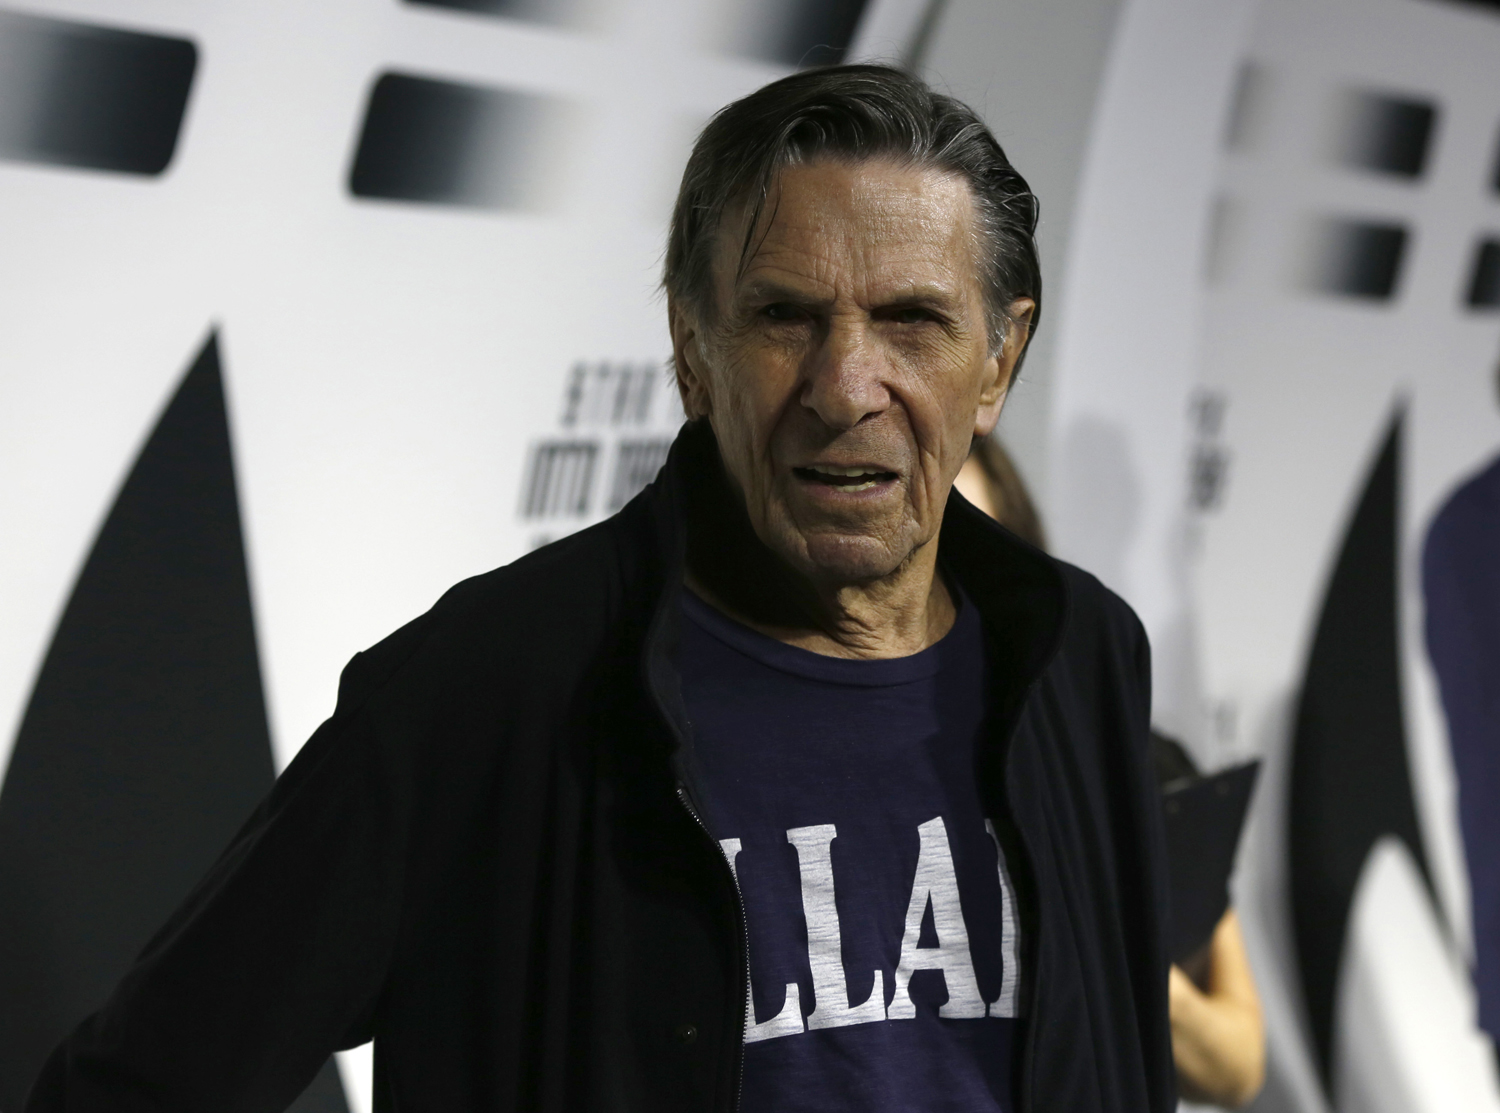 Nimoy poses at the party for the release of the Blu-Ray DVD of "Star Trek Into Darkness" at the California Science Center in Los Angeles